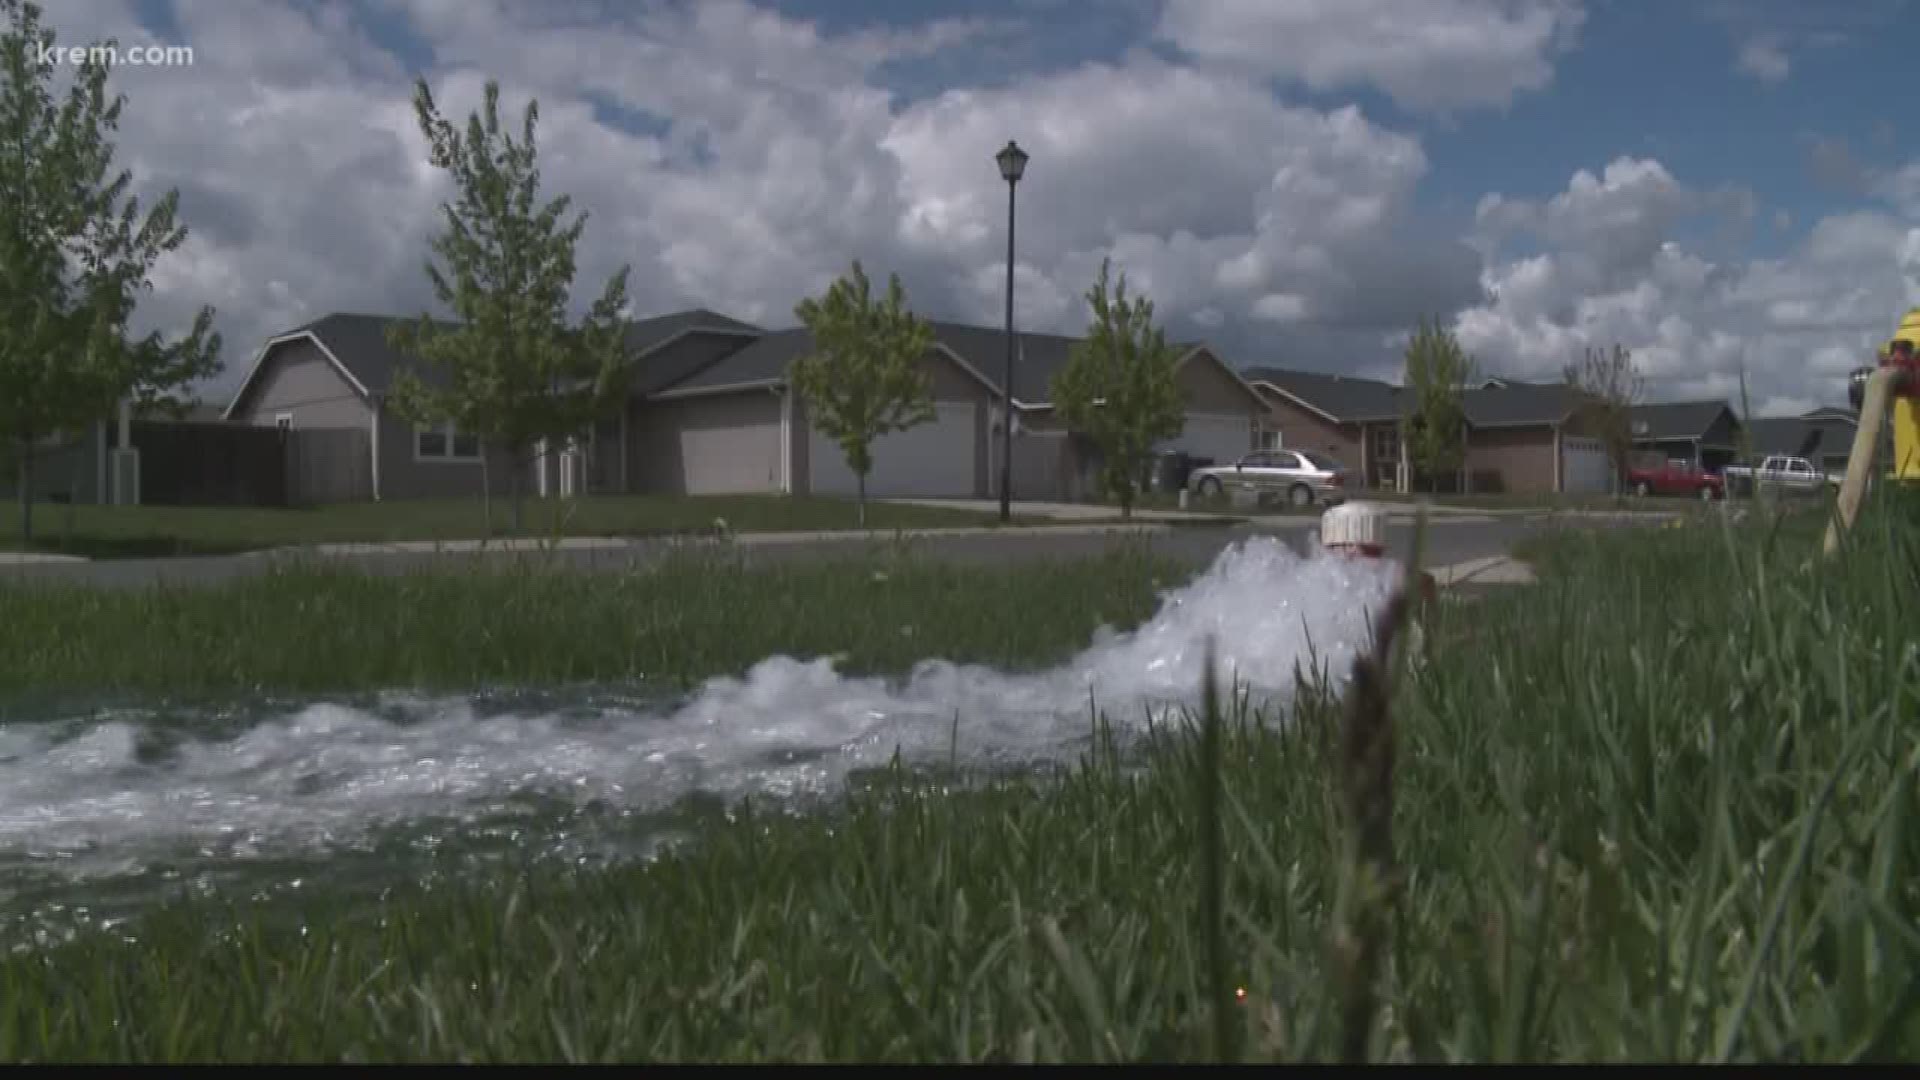 Spokane could divert millions of gallons of water to Airway Heights this summer (4-2-18)